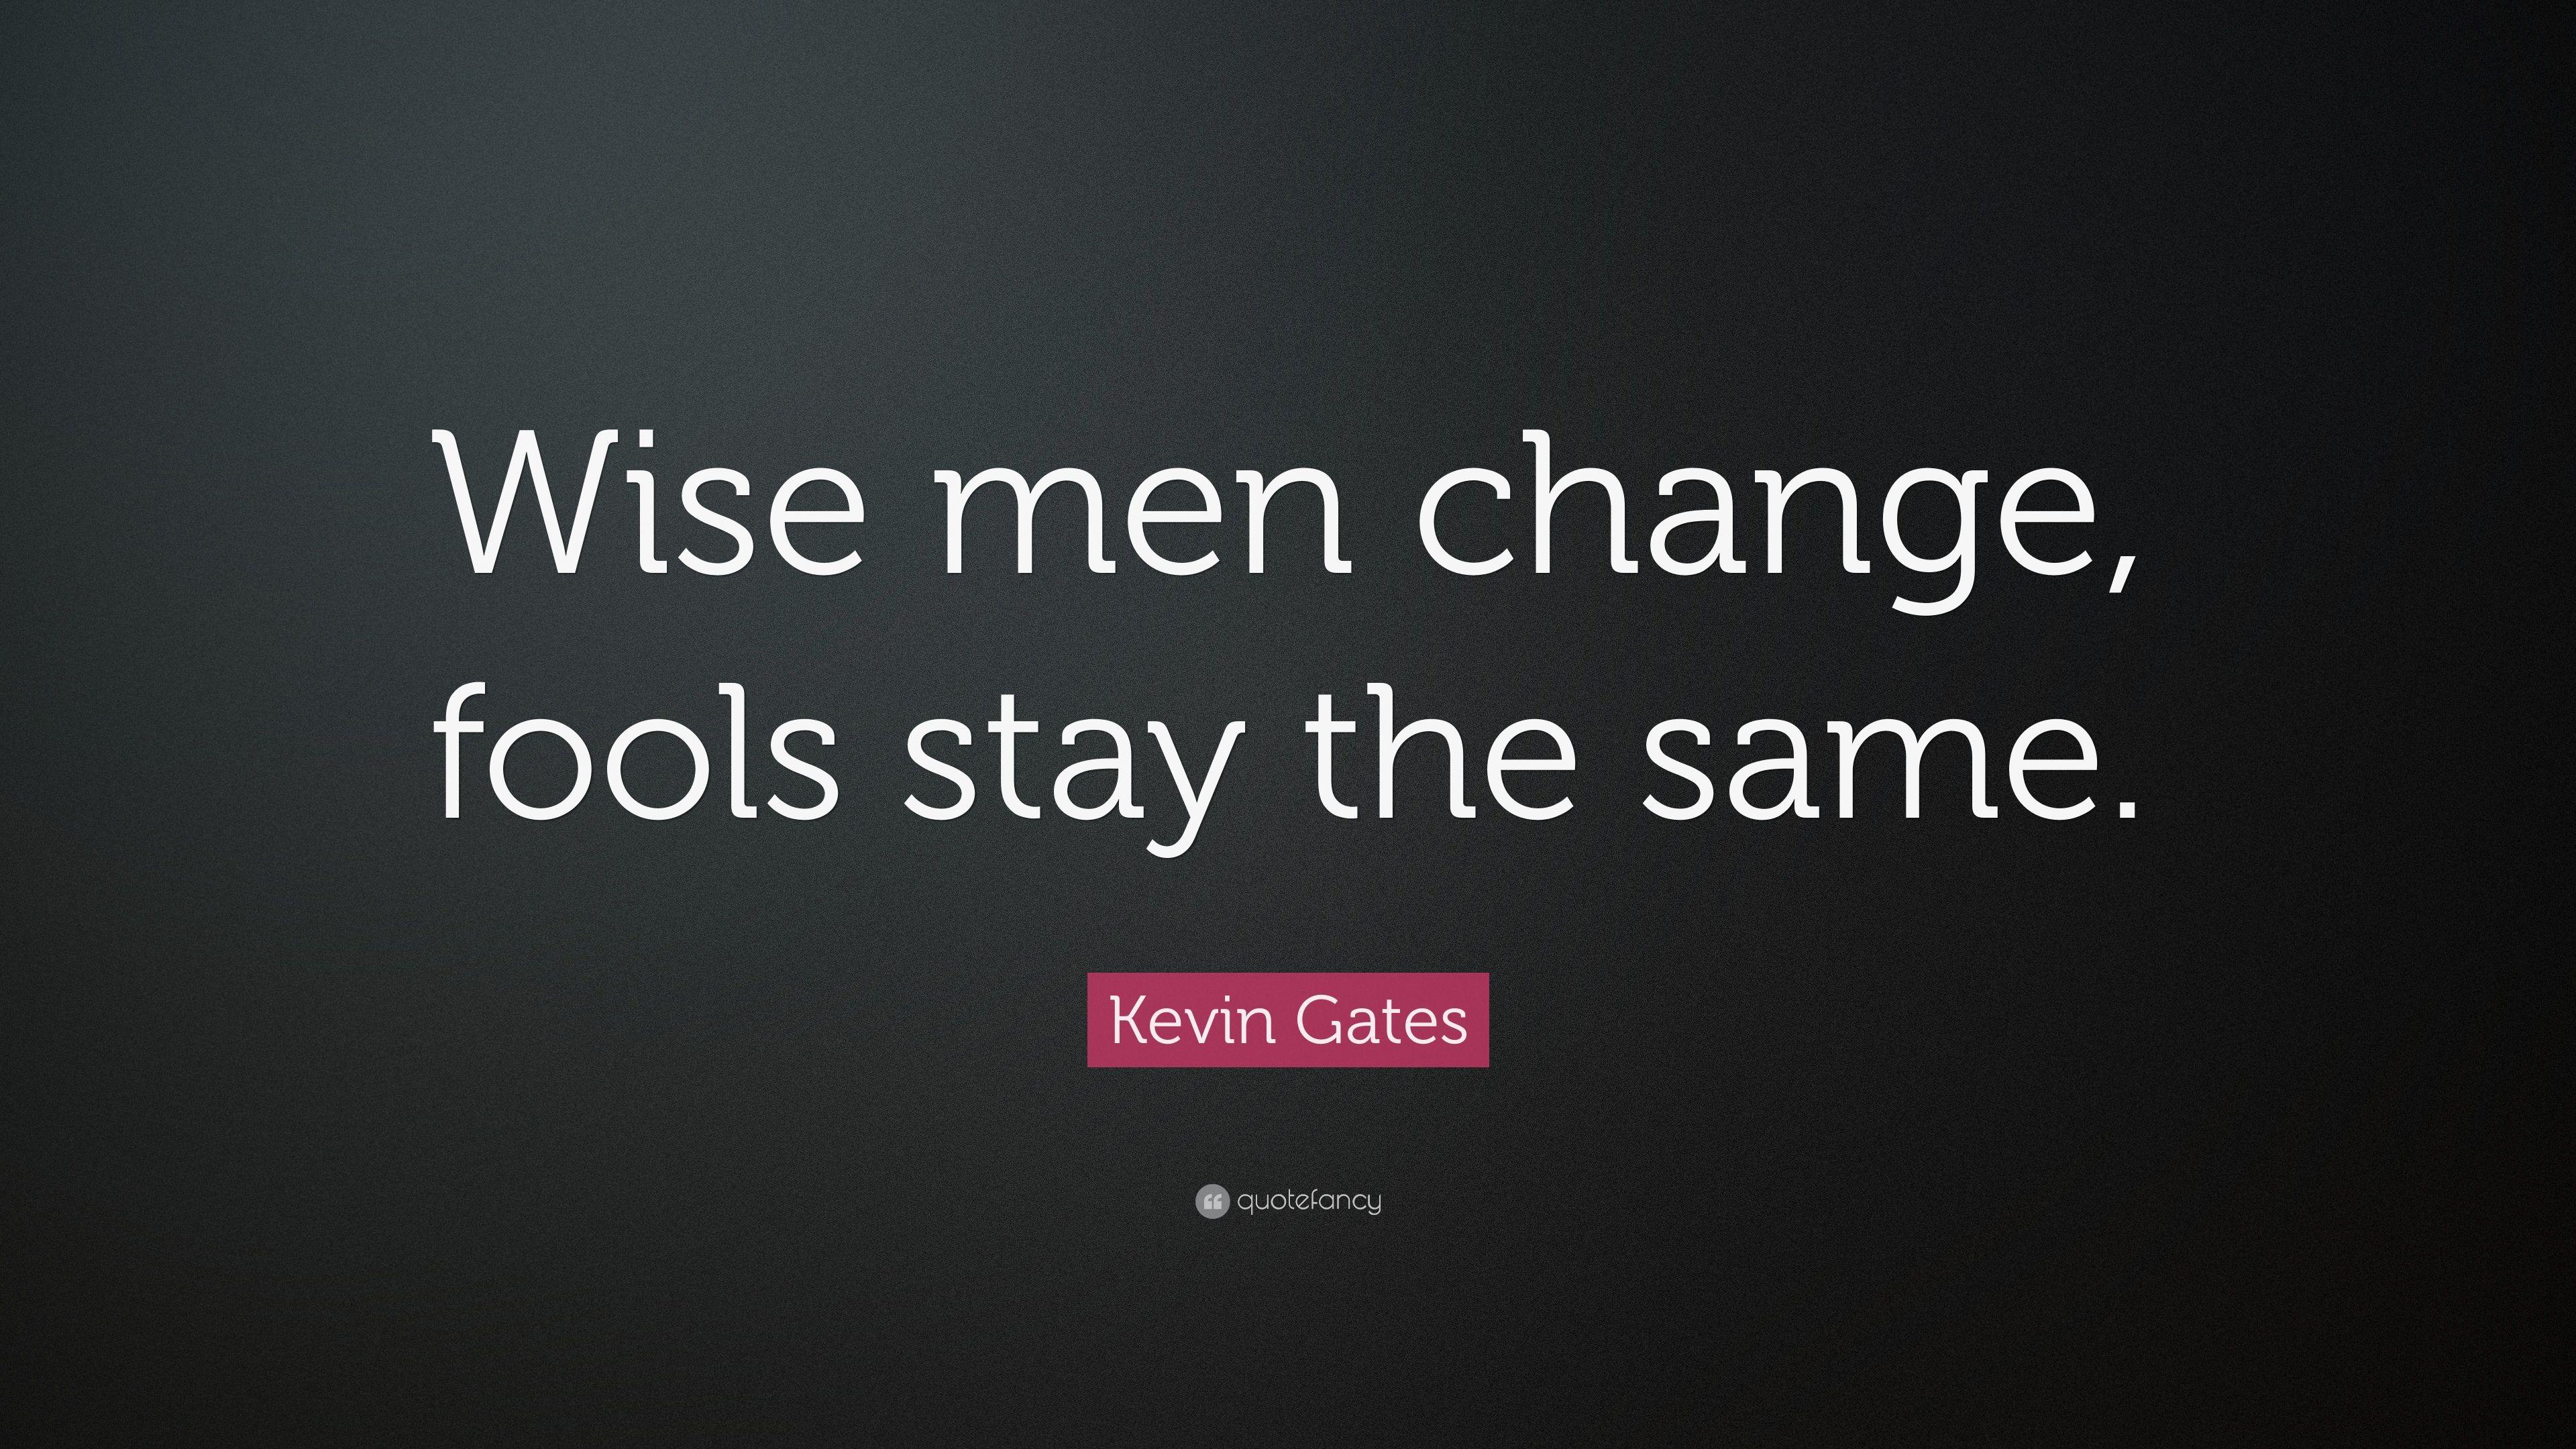 Kevin Gates Quote: “Wise men change, fools stay the same.” 17